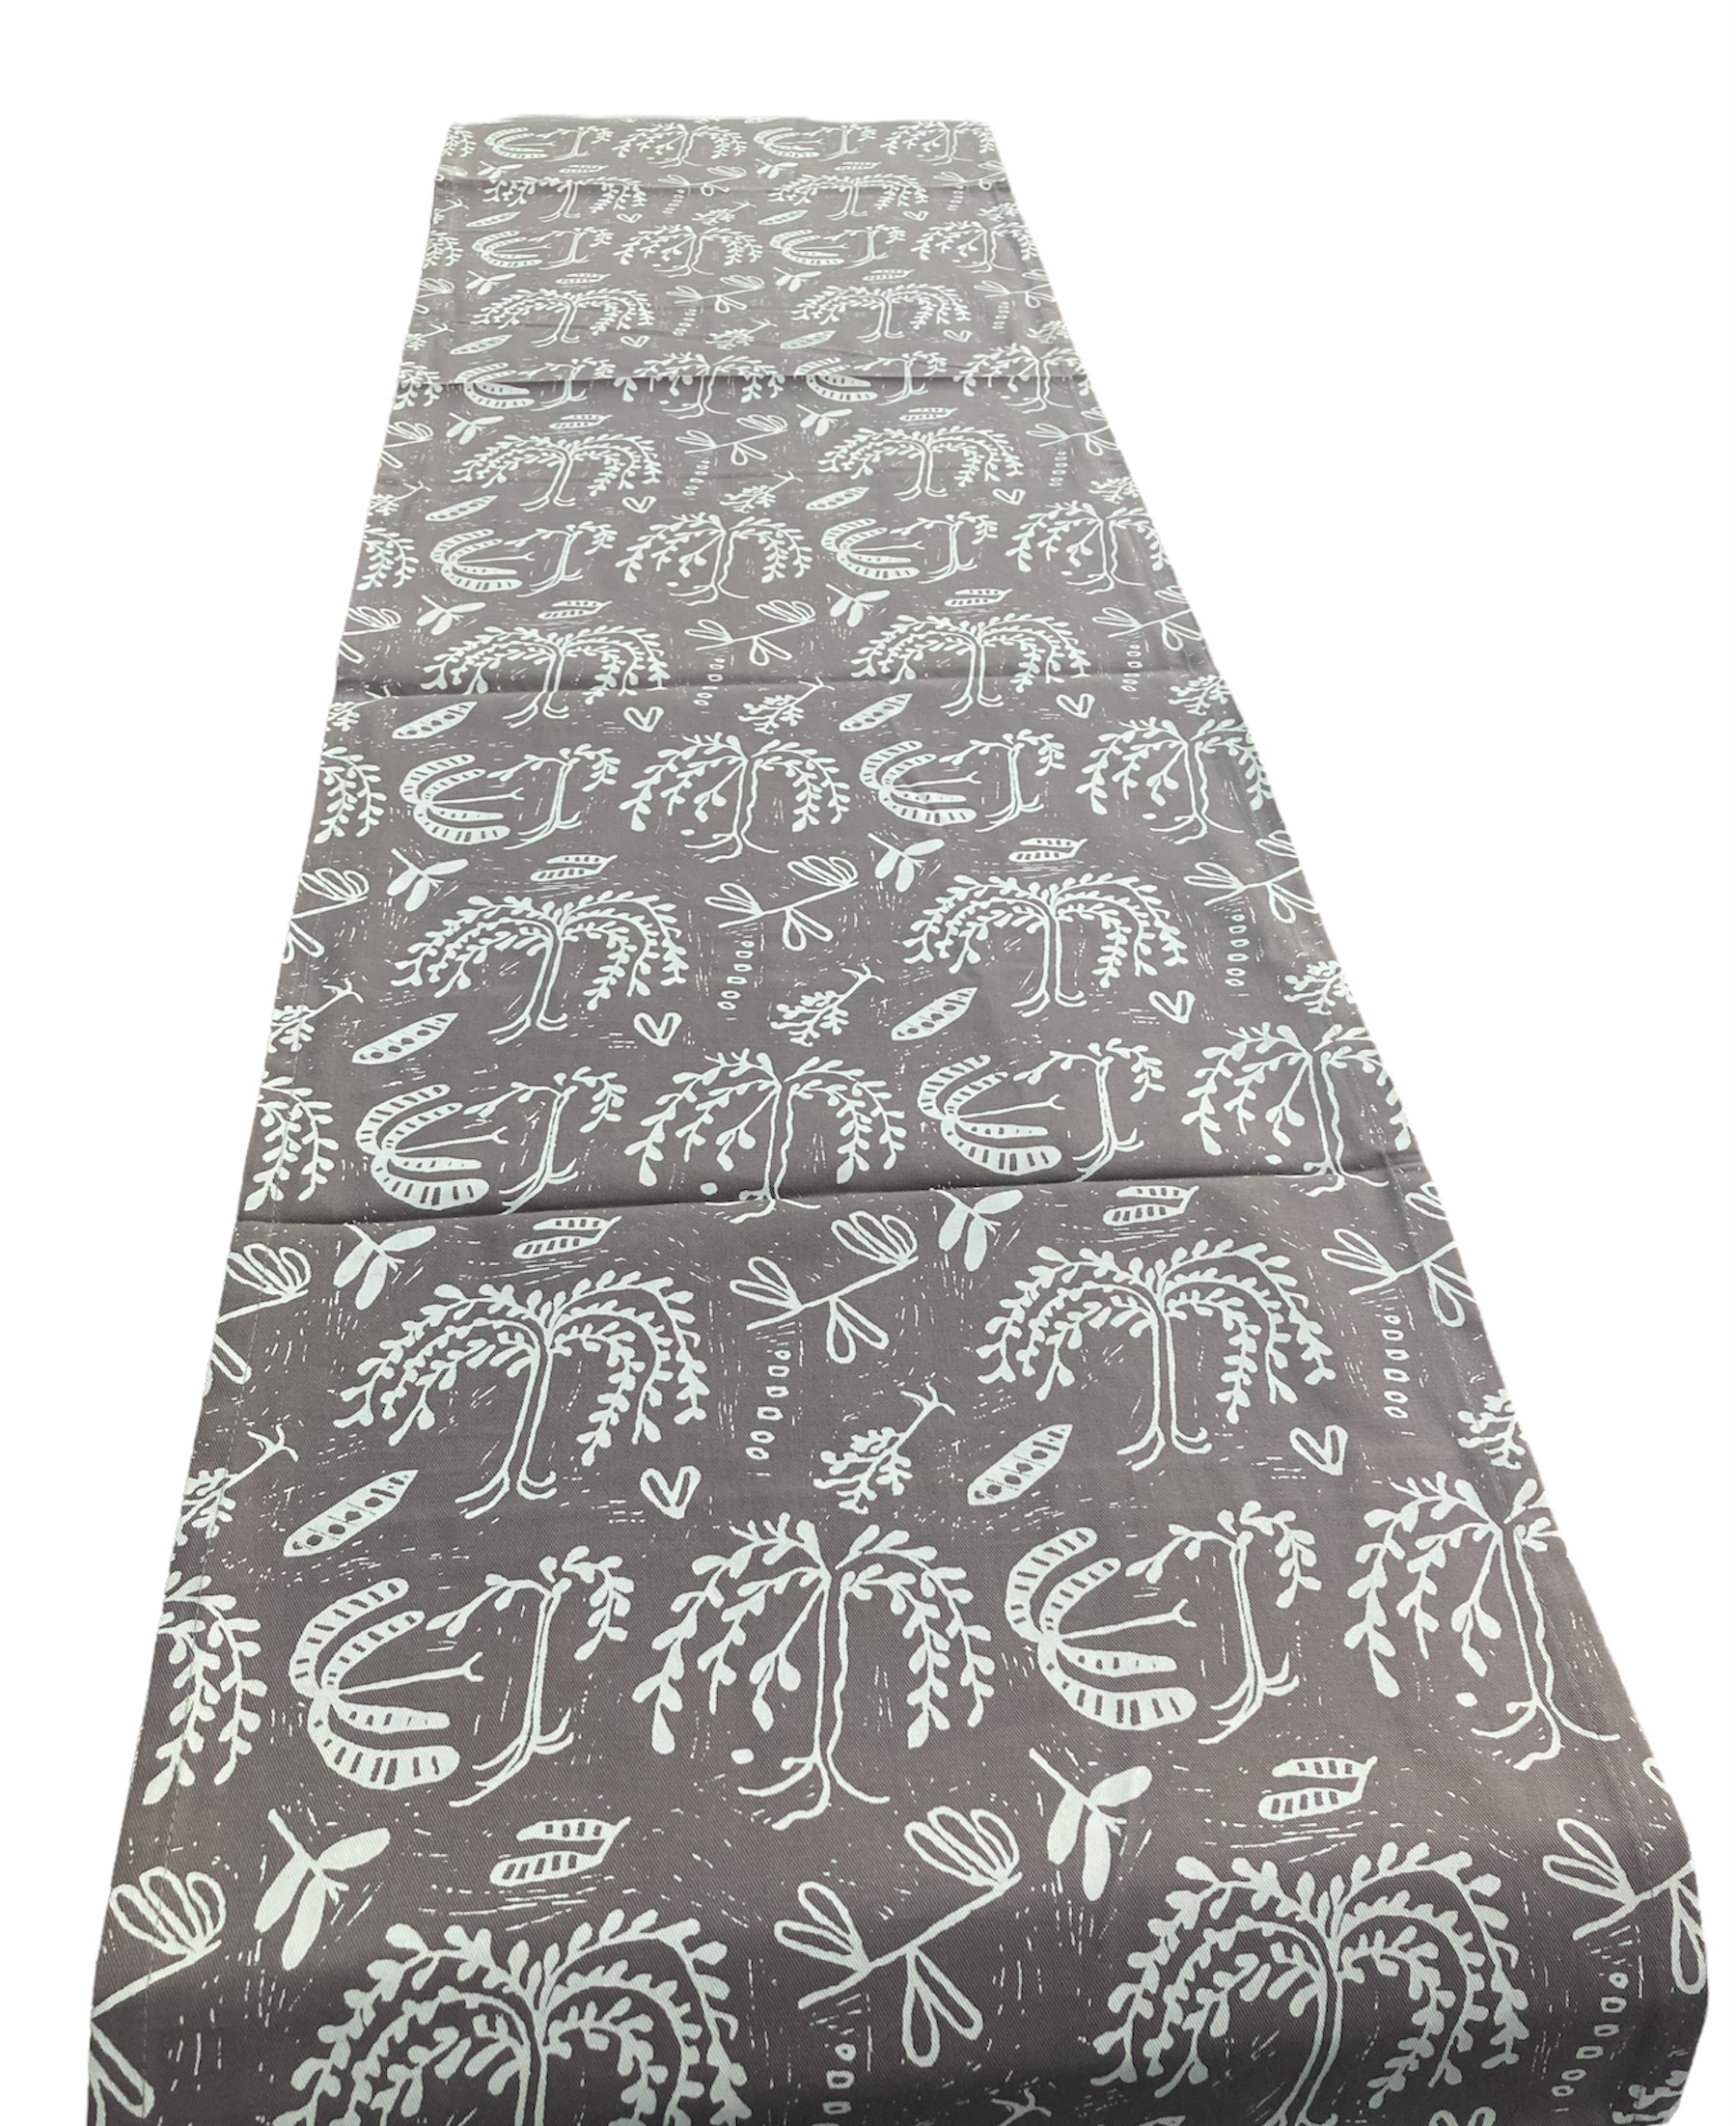 100% cotton Table Runner 96\" x 16\" from Namibia - Design 18l